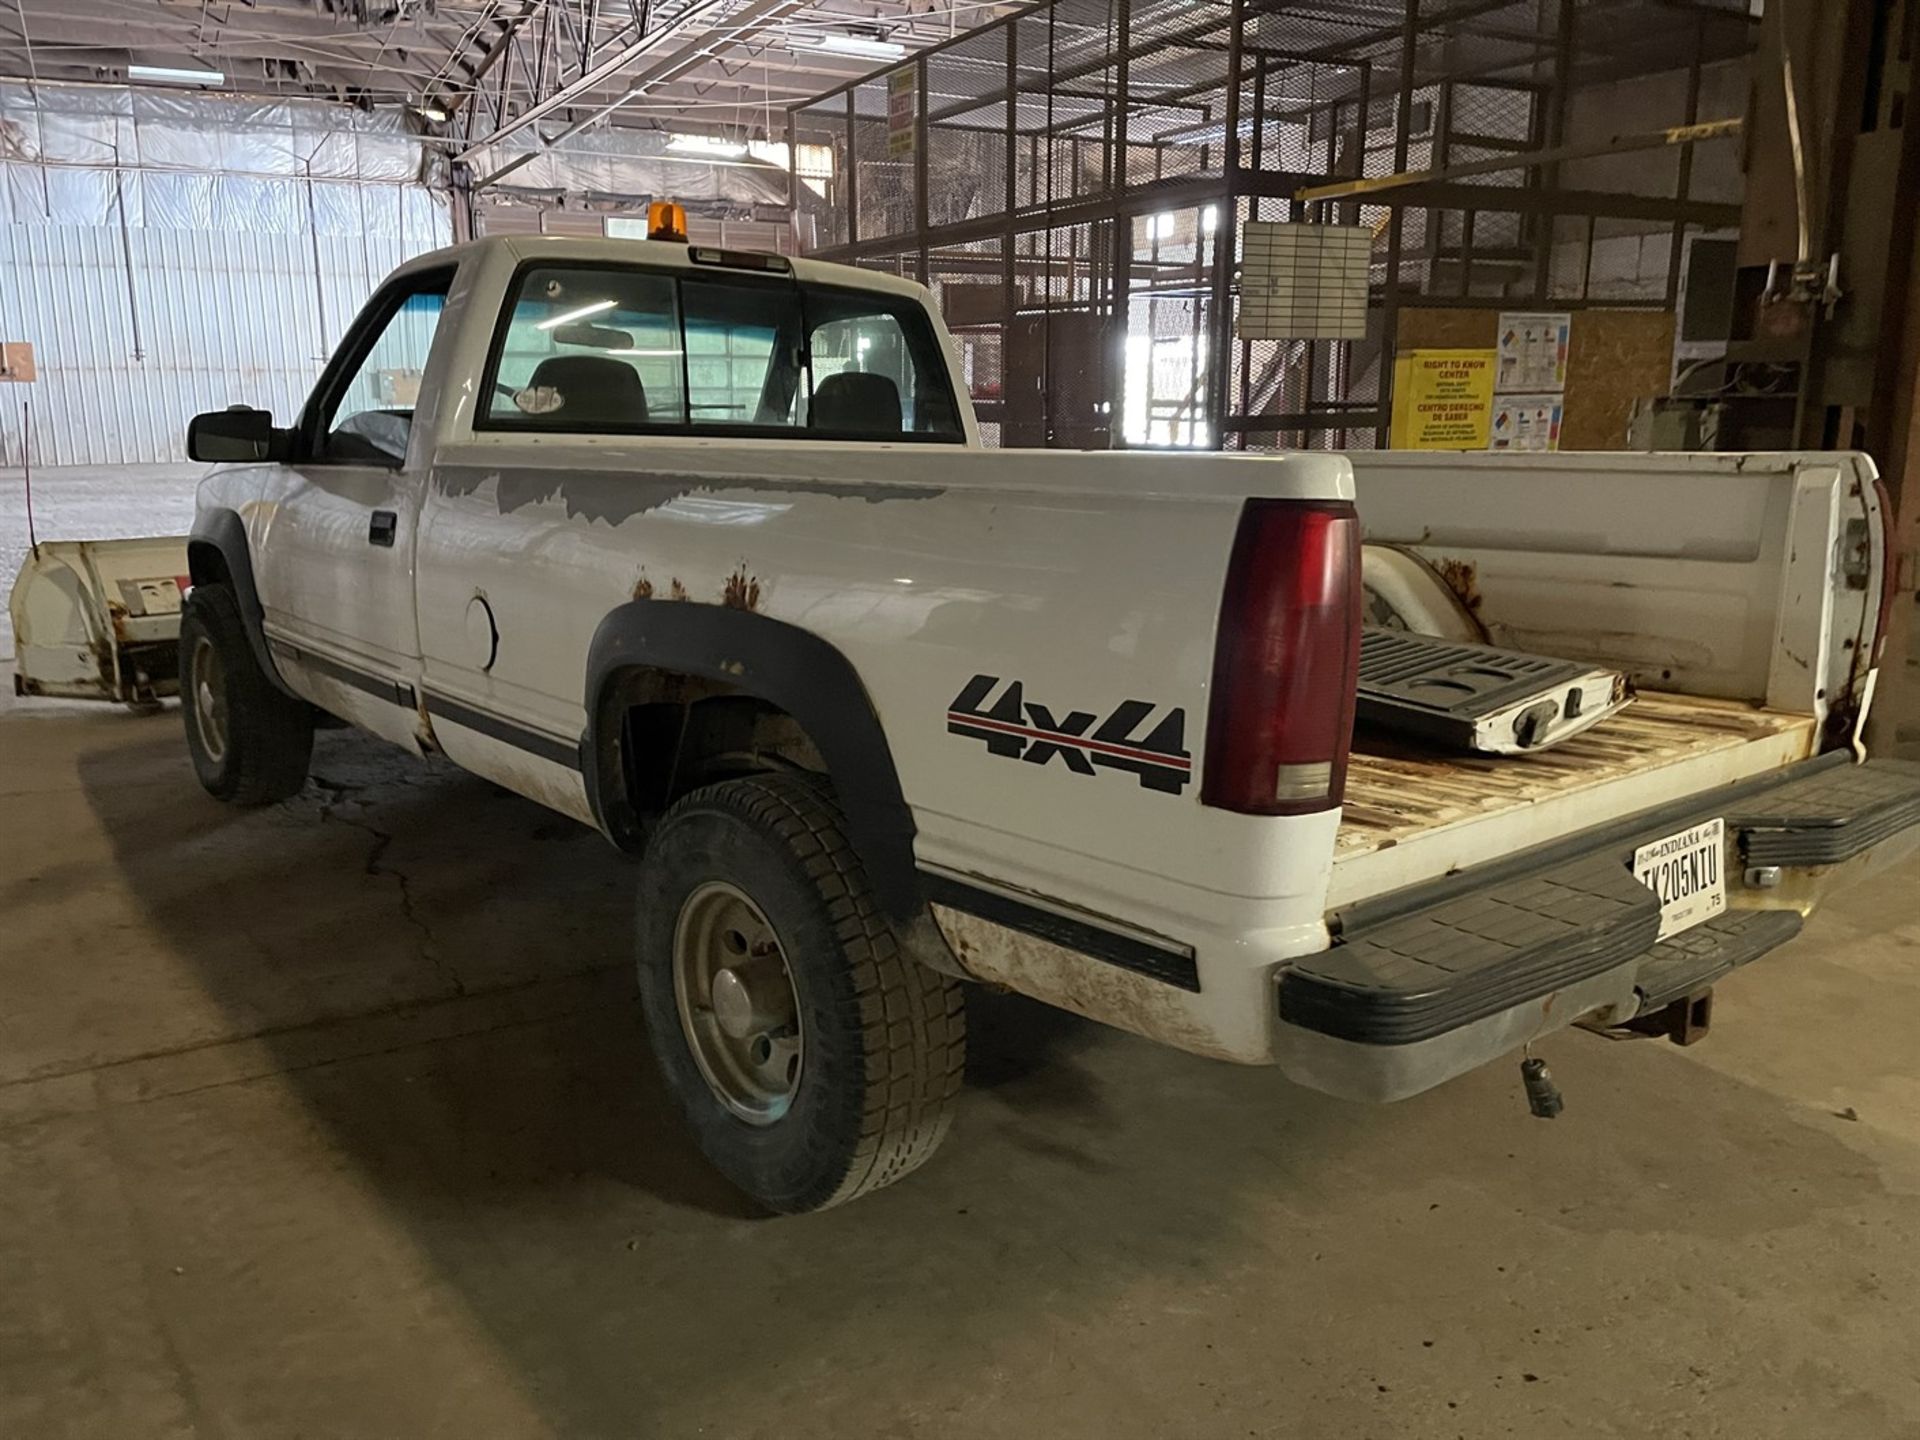 Chevy 2500 Pickup Truck, 4x4, Automatic, 183,638 Miles, Blizzard Plow, Needs Battery, Needs Fuel - Image 3 of 12